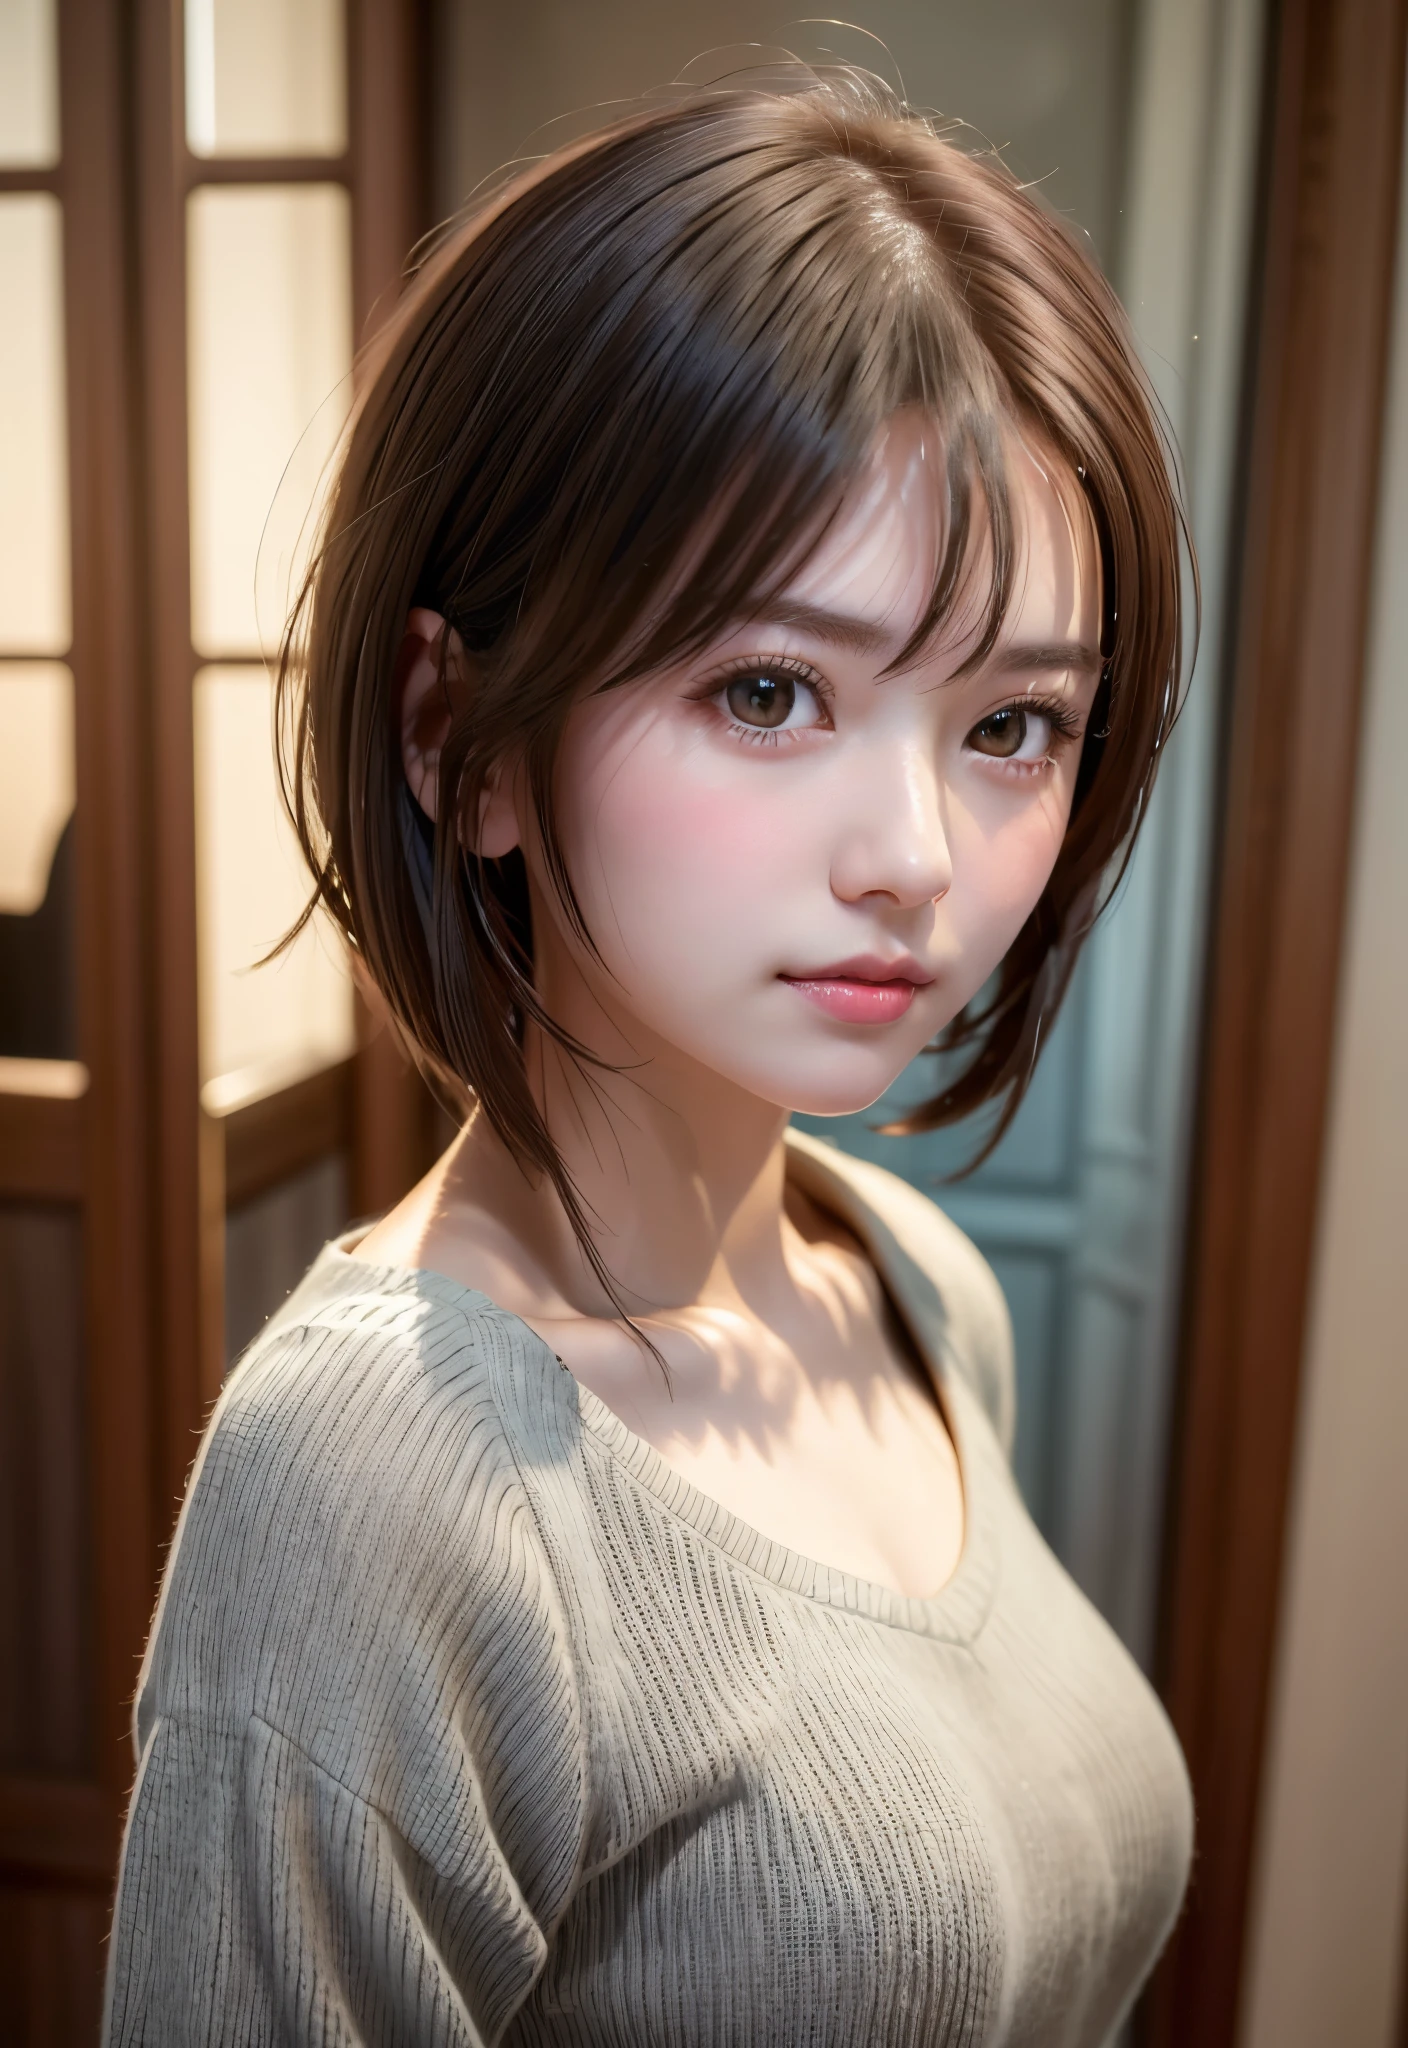 Summer knit with short hair and white, summer knit, Short hair, short hair with bangs, Cute face girl, Cute little face in portrait, French Bob, pale fair skin!!, short brown haired, soft portrait shot 8 k, beatiful lights, Beautiful young girl, Young girl in a bob cut, Top image quality, masutepiece,